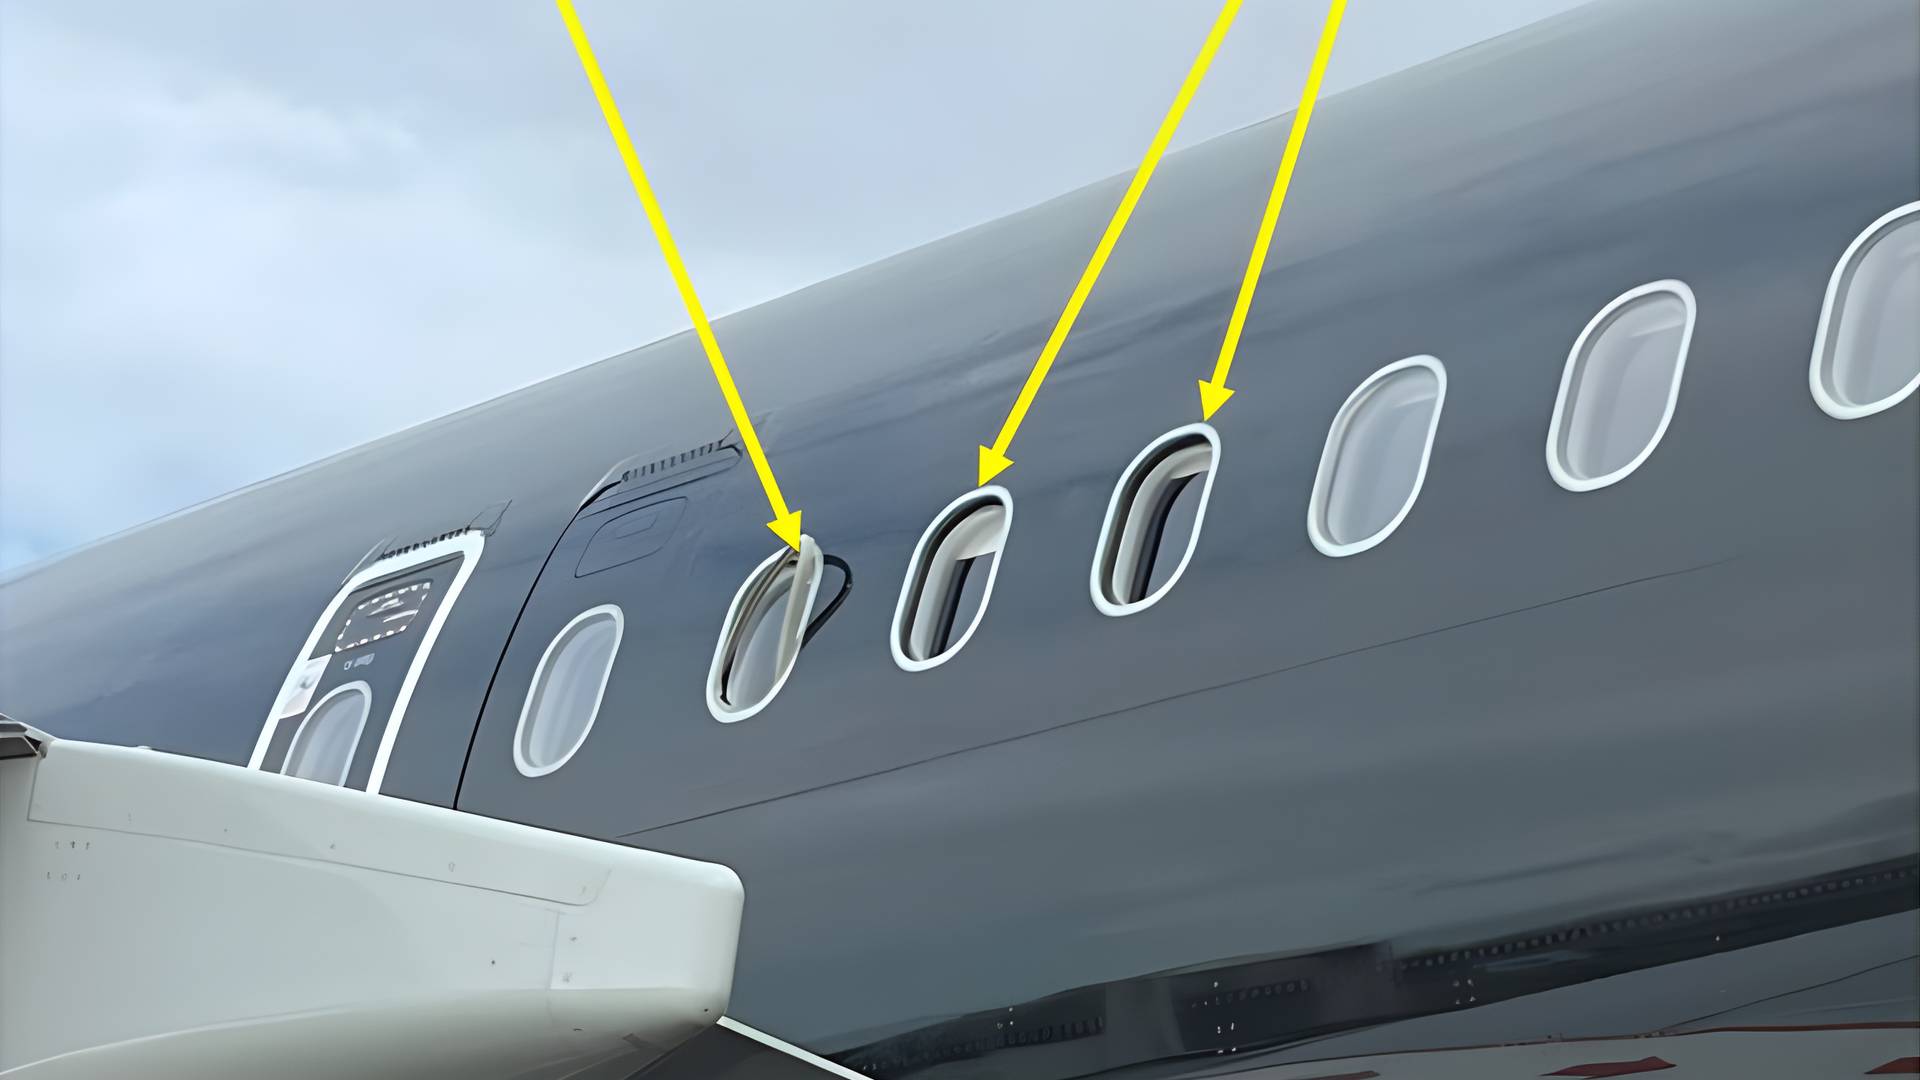 A321neo Passenger Windows Separated Because of… Filming!